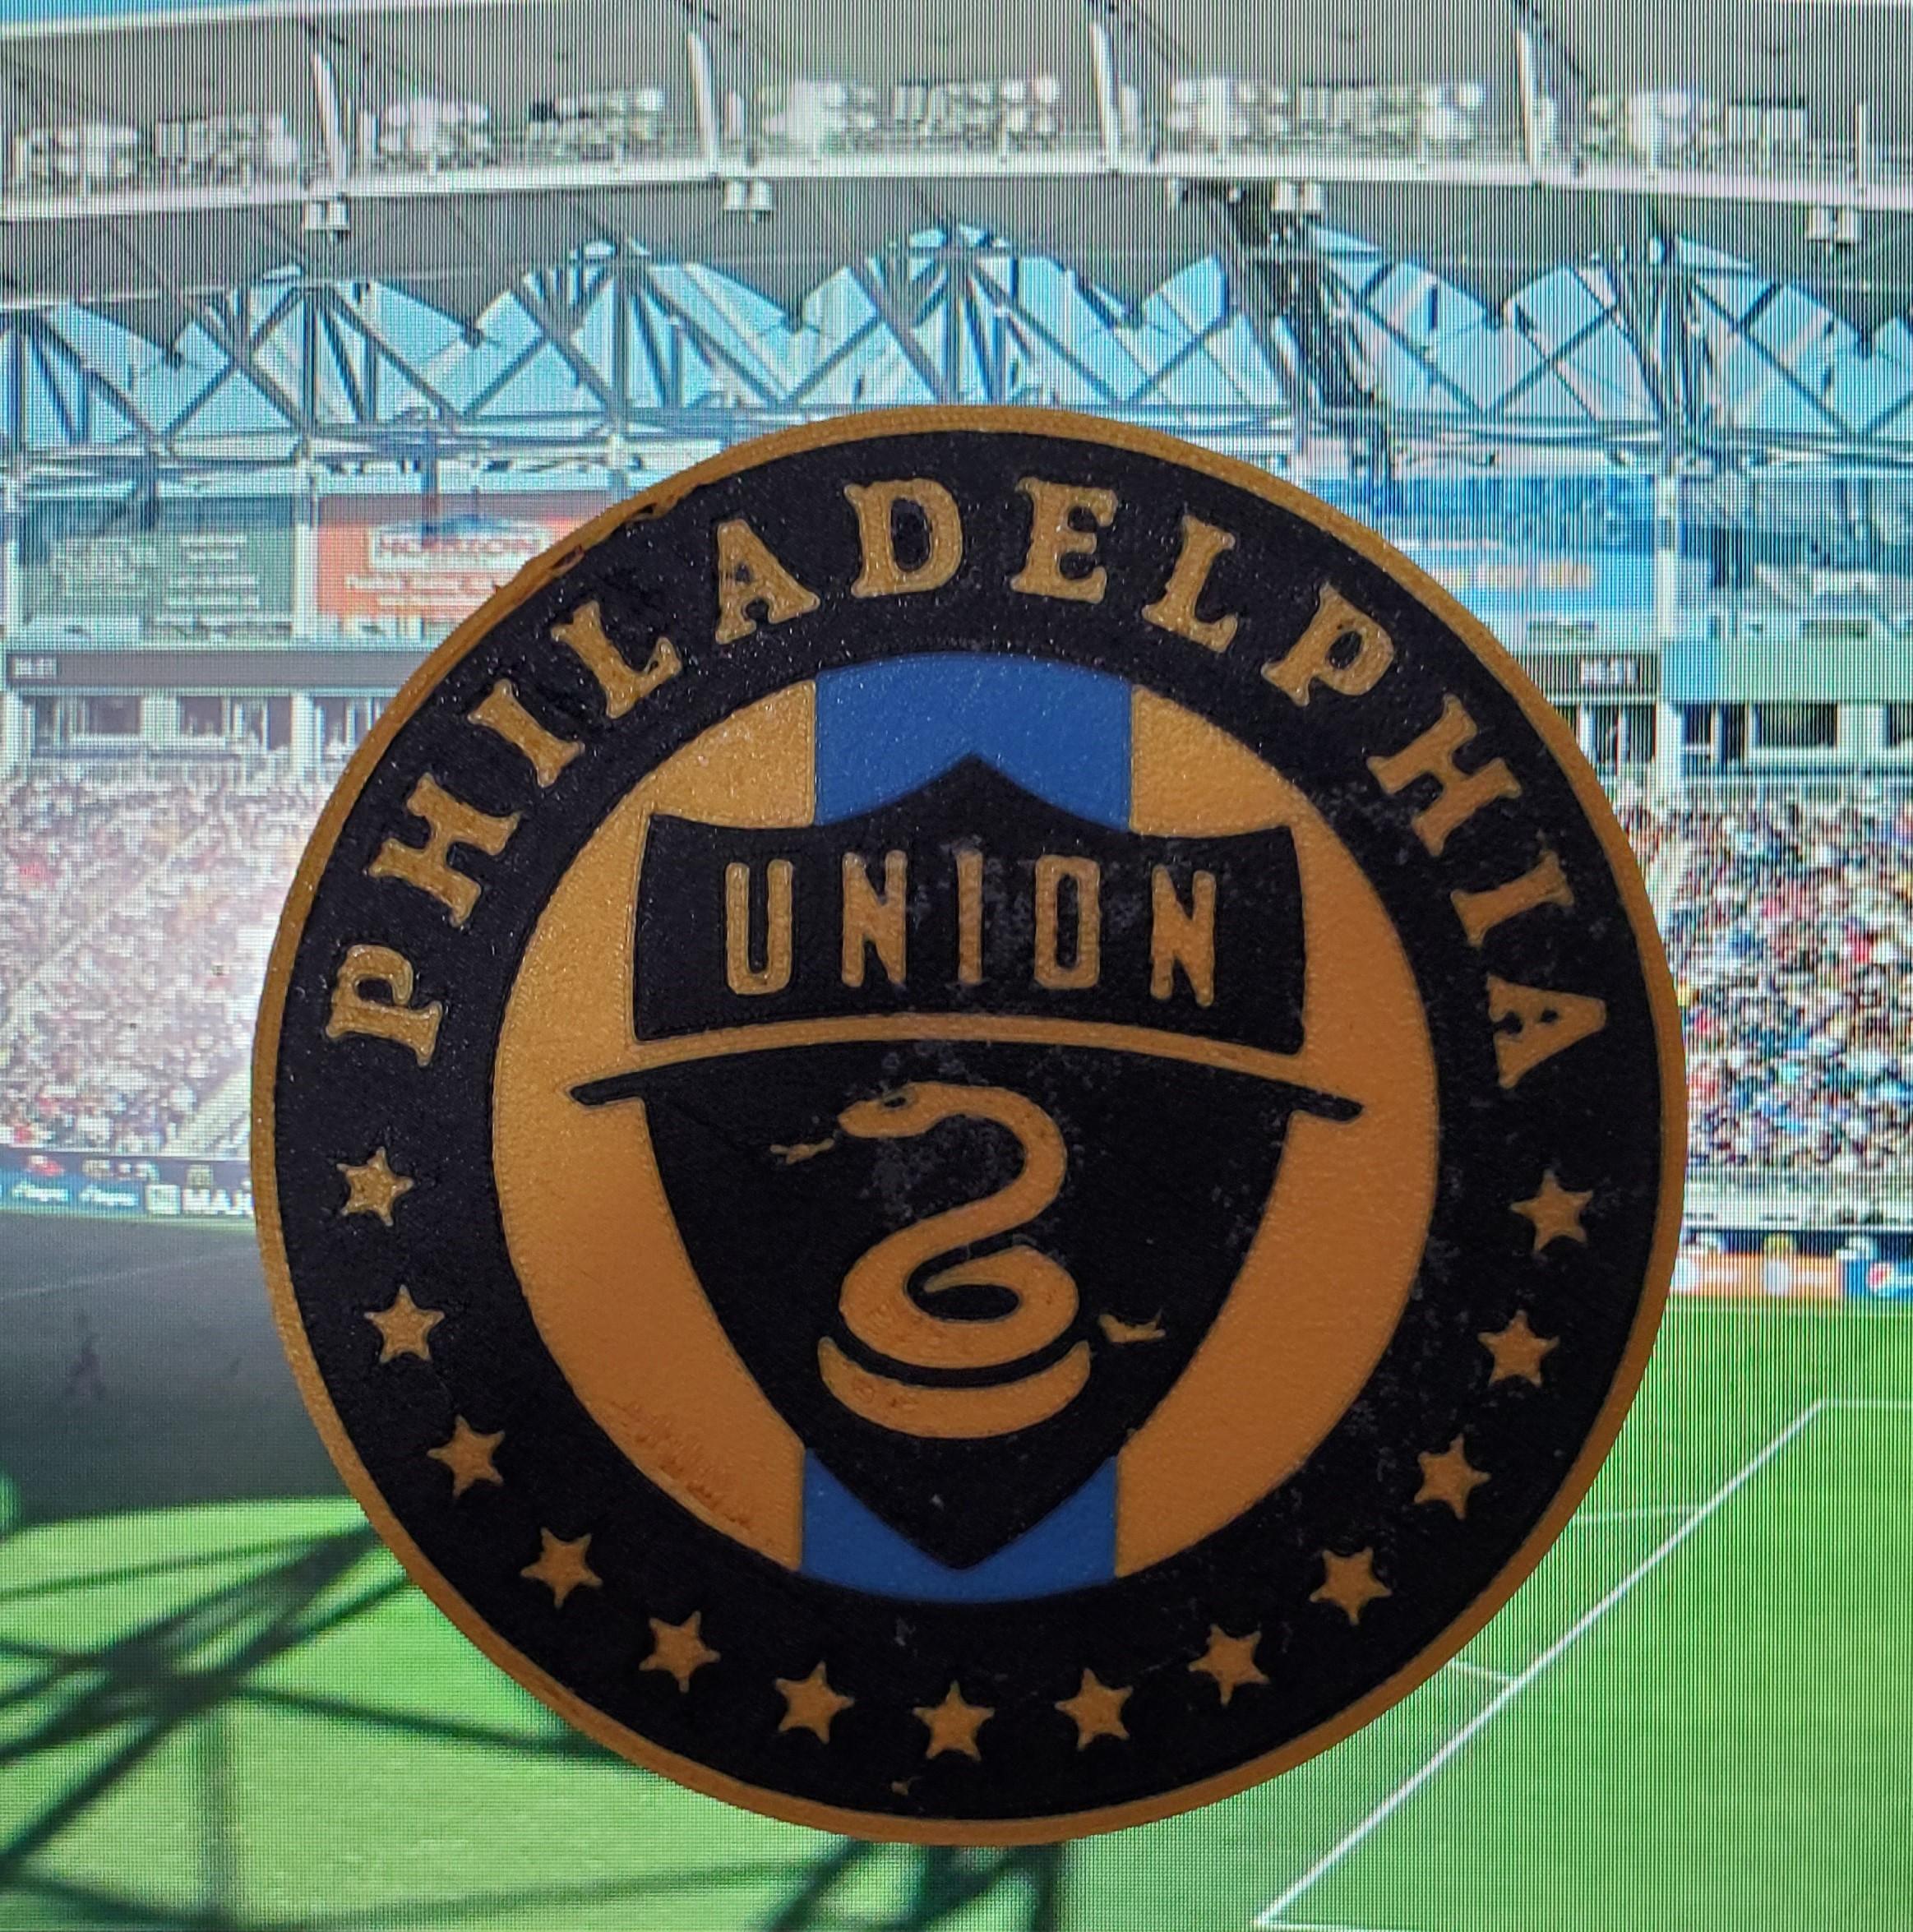 AMS / MMU Philadelphia Union coaster or plaque - 3D model by  DaddyWazzy_TheCreator on Thangs